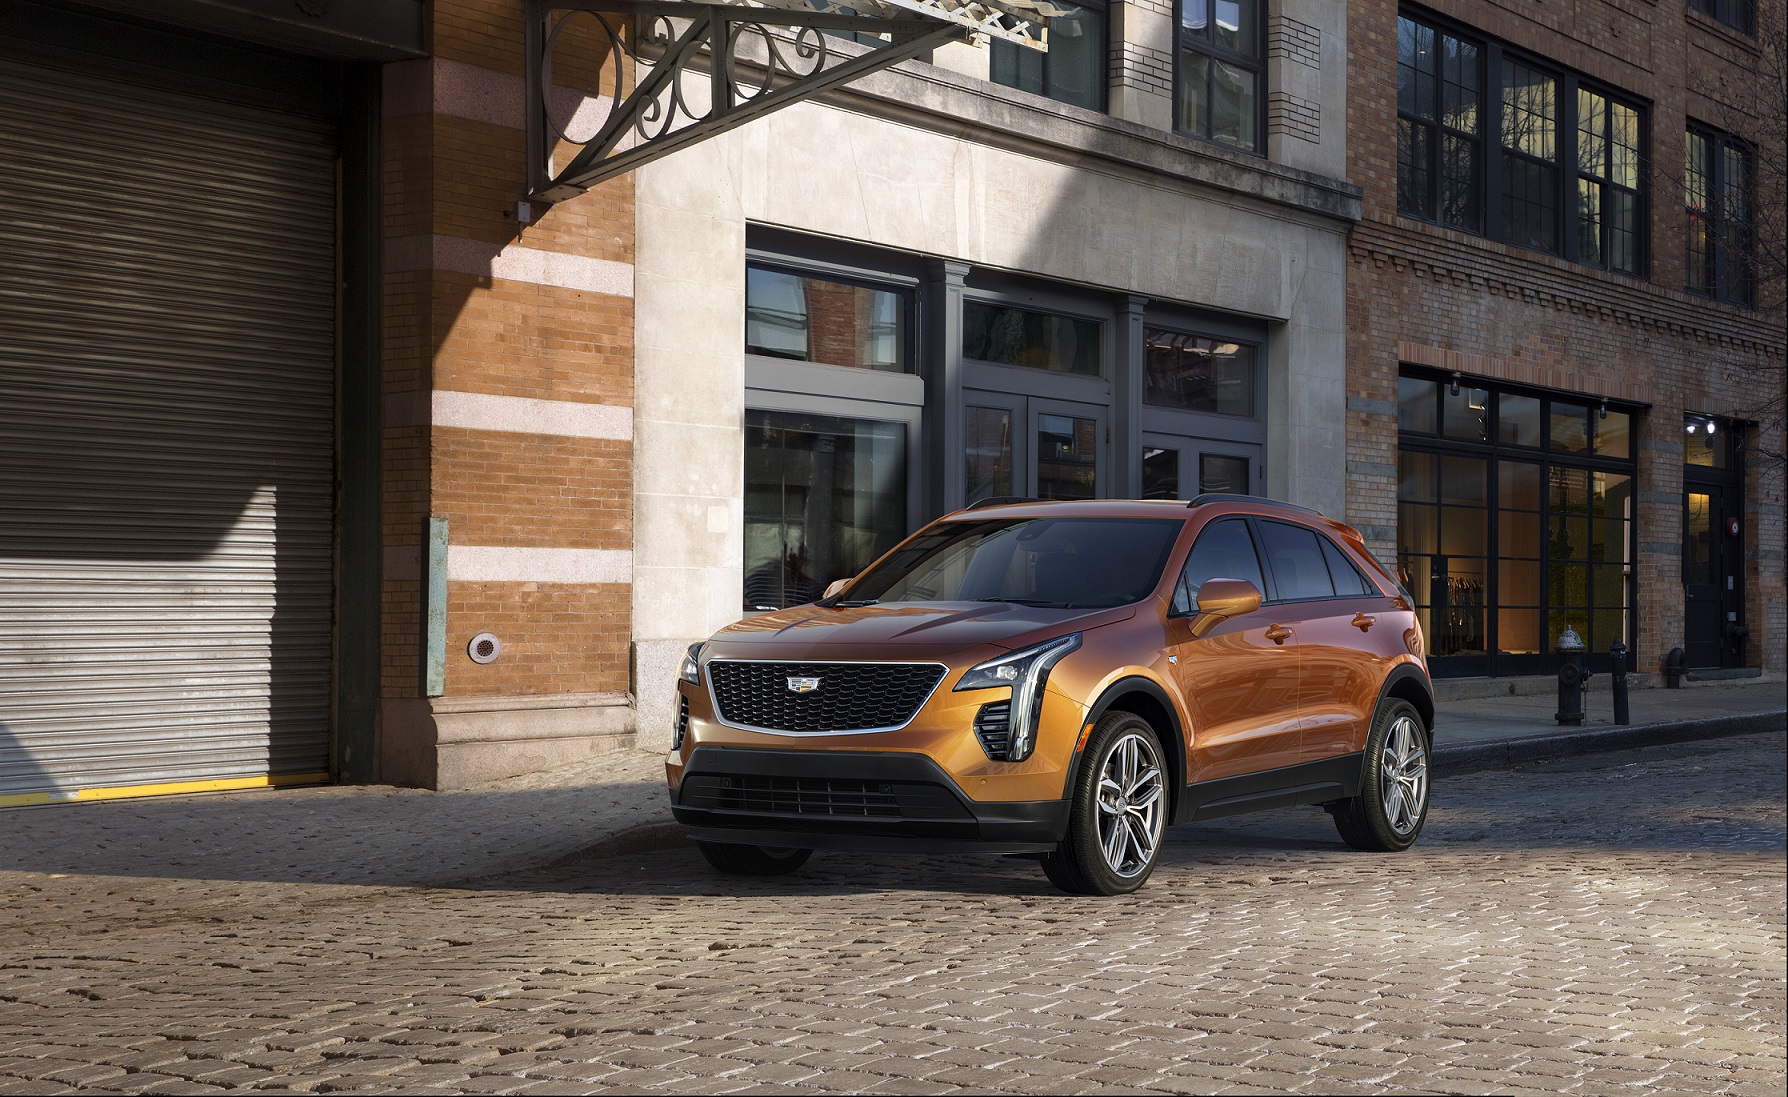 Cadillac to Launch All-New XT4 at Sole DXB 2018